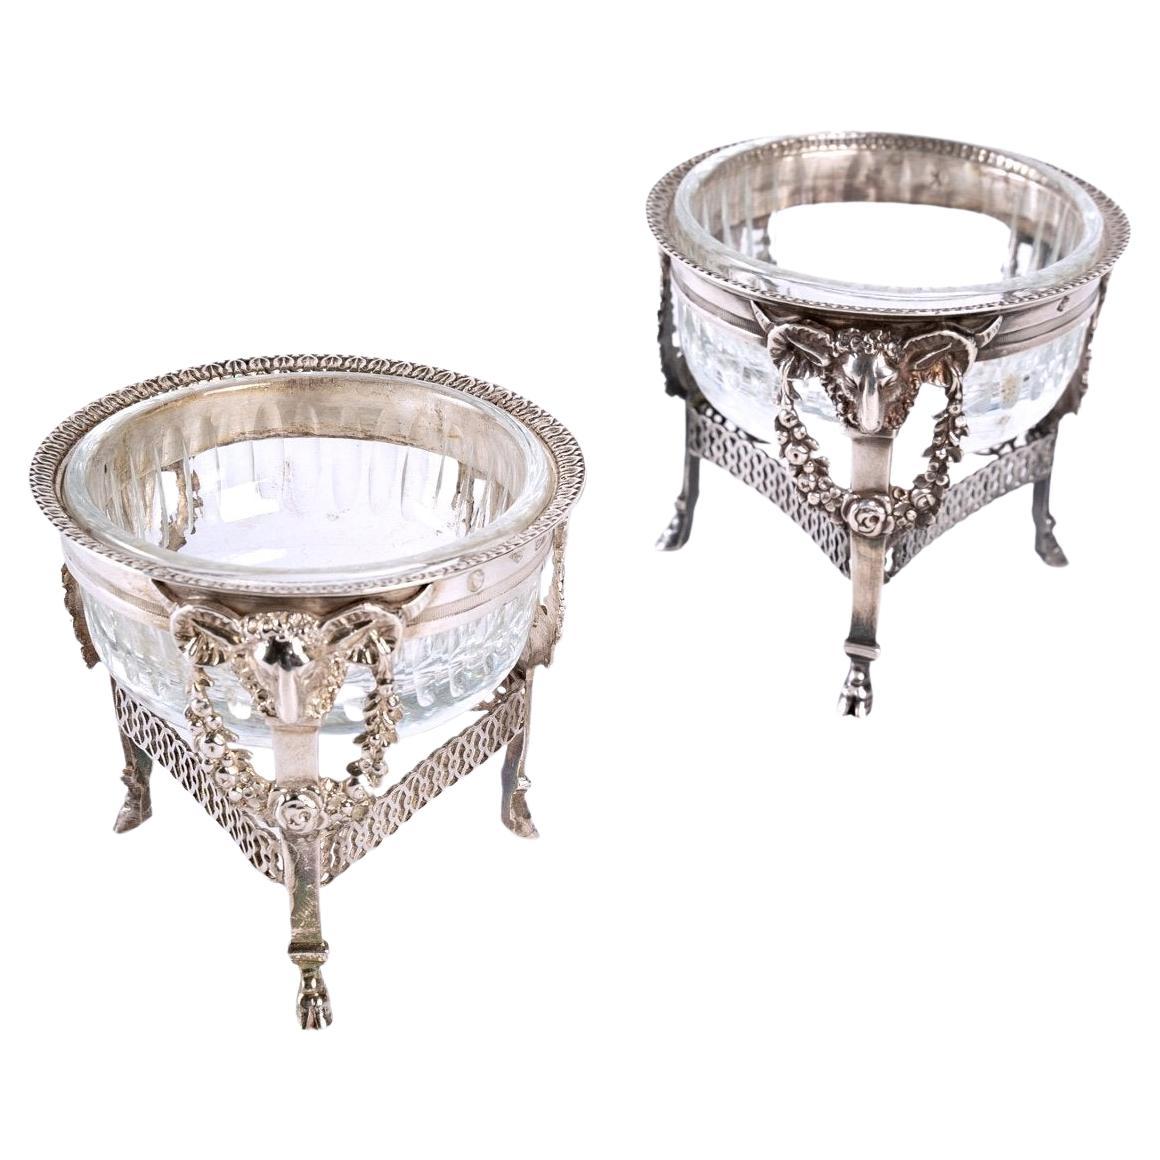 Pair of Silver and Crystal Salerons, Period : Early 19th Century, Restoration